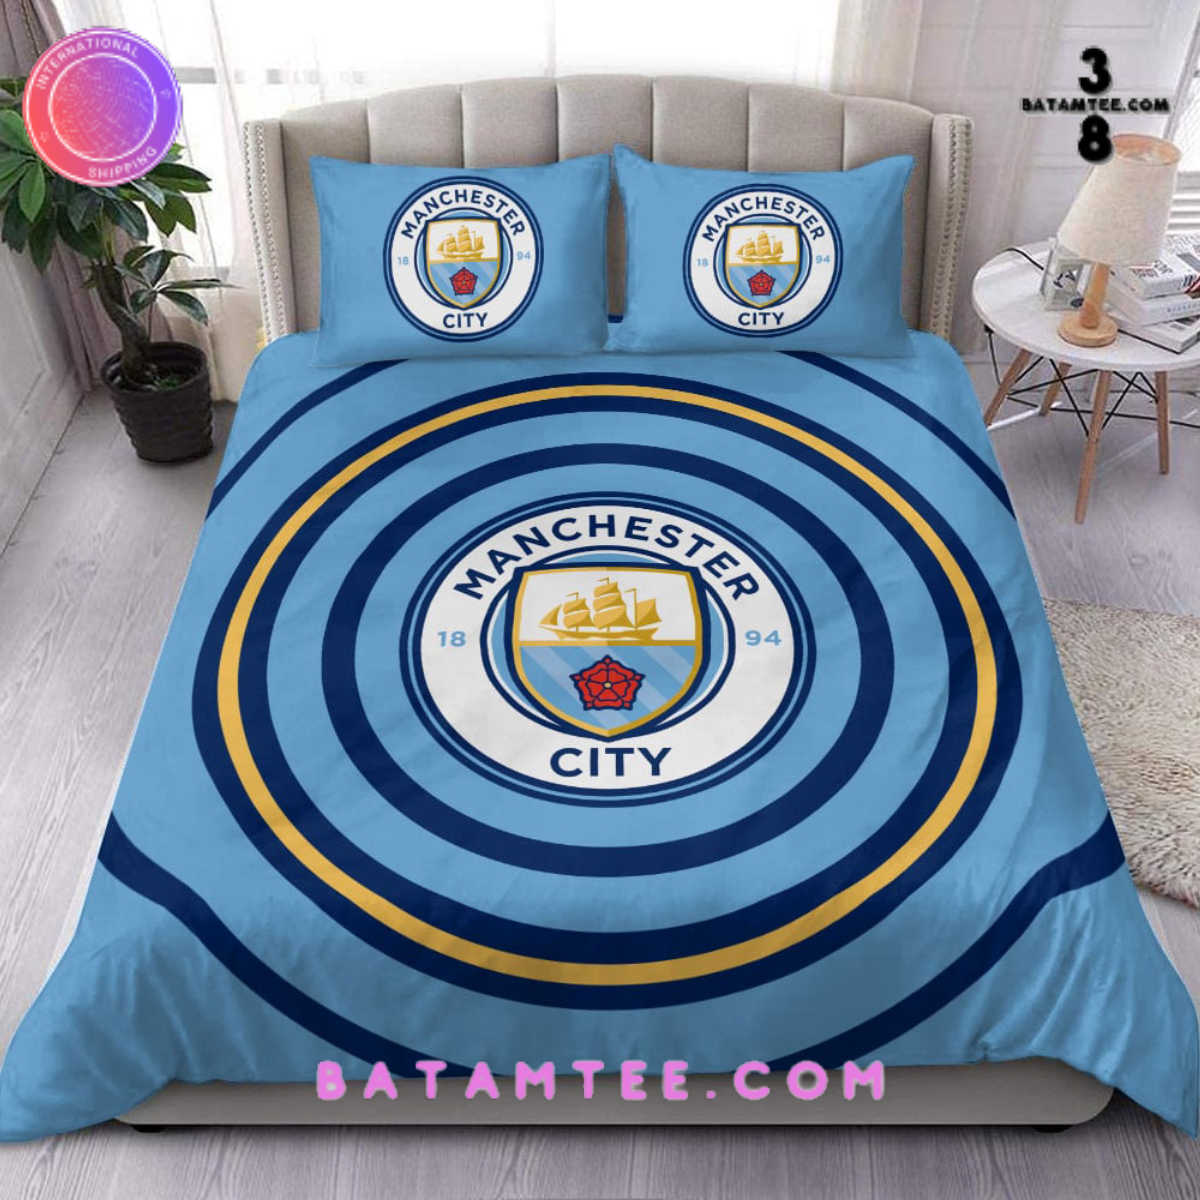 New Bedding Set collection for Manchester City FC fans-Limited Edition's Overview - Batamtee Shop - Threads & Totes: Your Style Destination